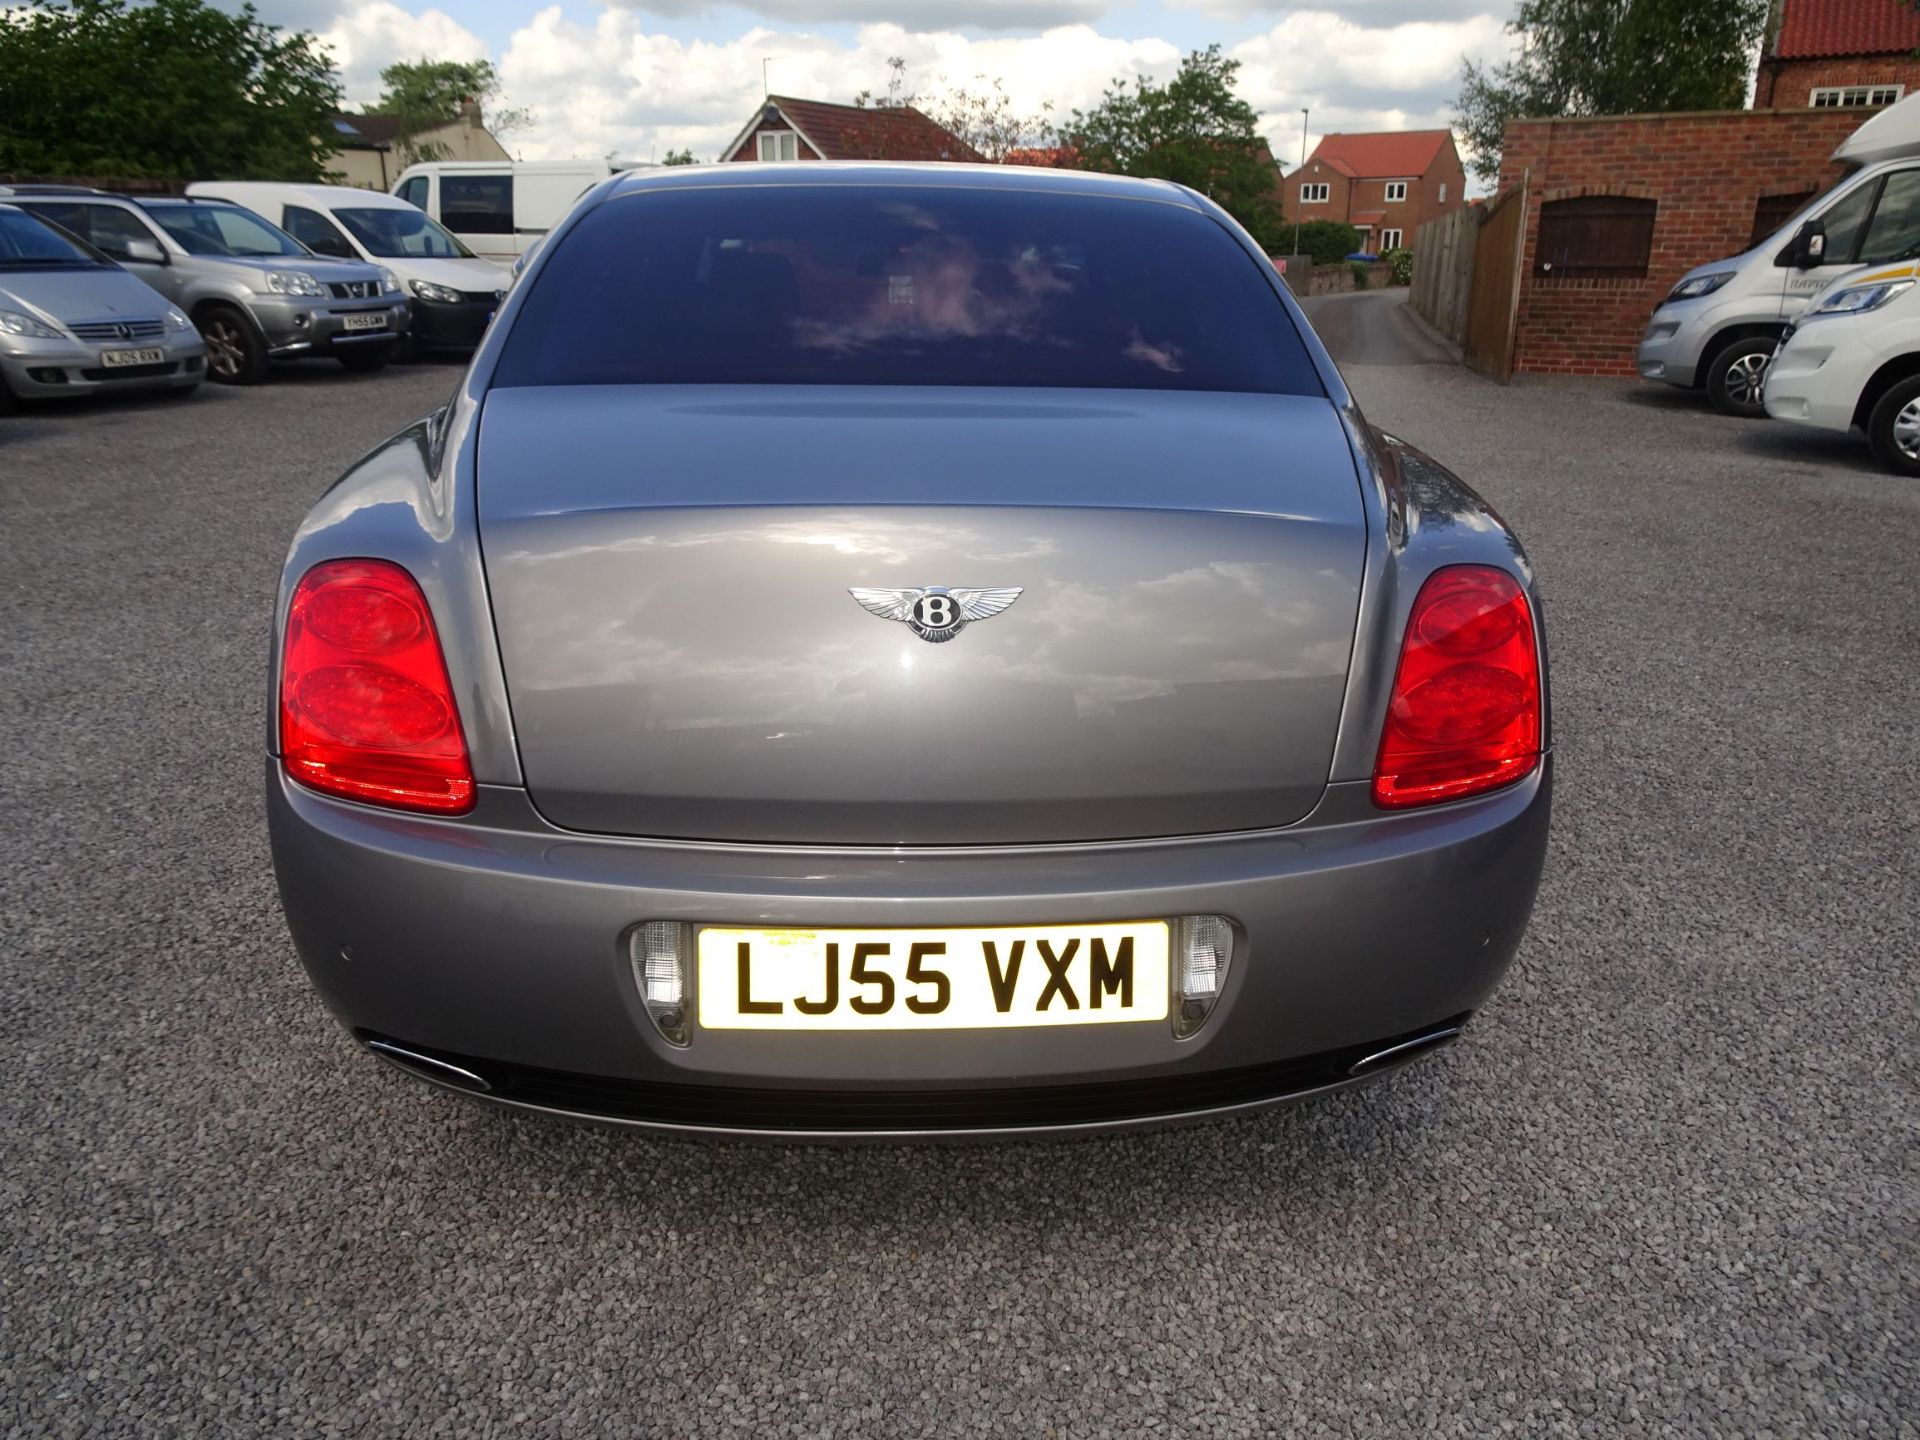 BENTLEY CONTINENTAL FLYING SPUR - 2005 '55' REG - Image 5 of 10